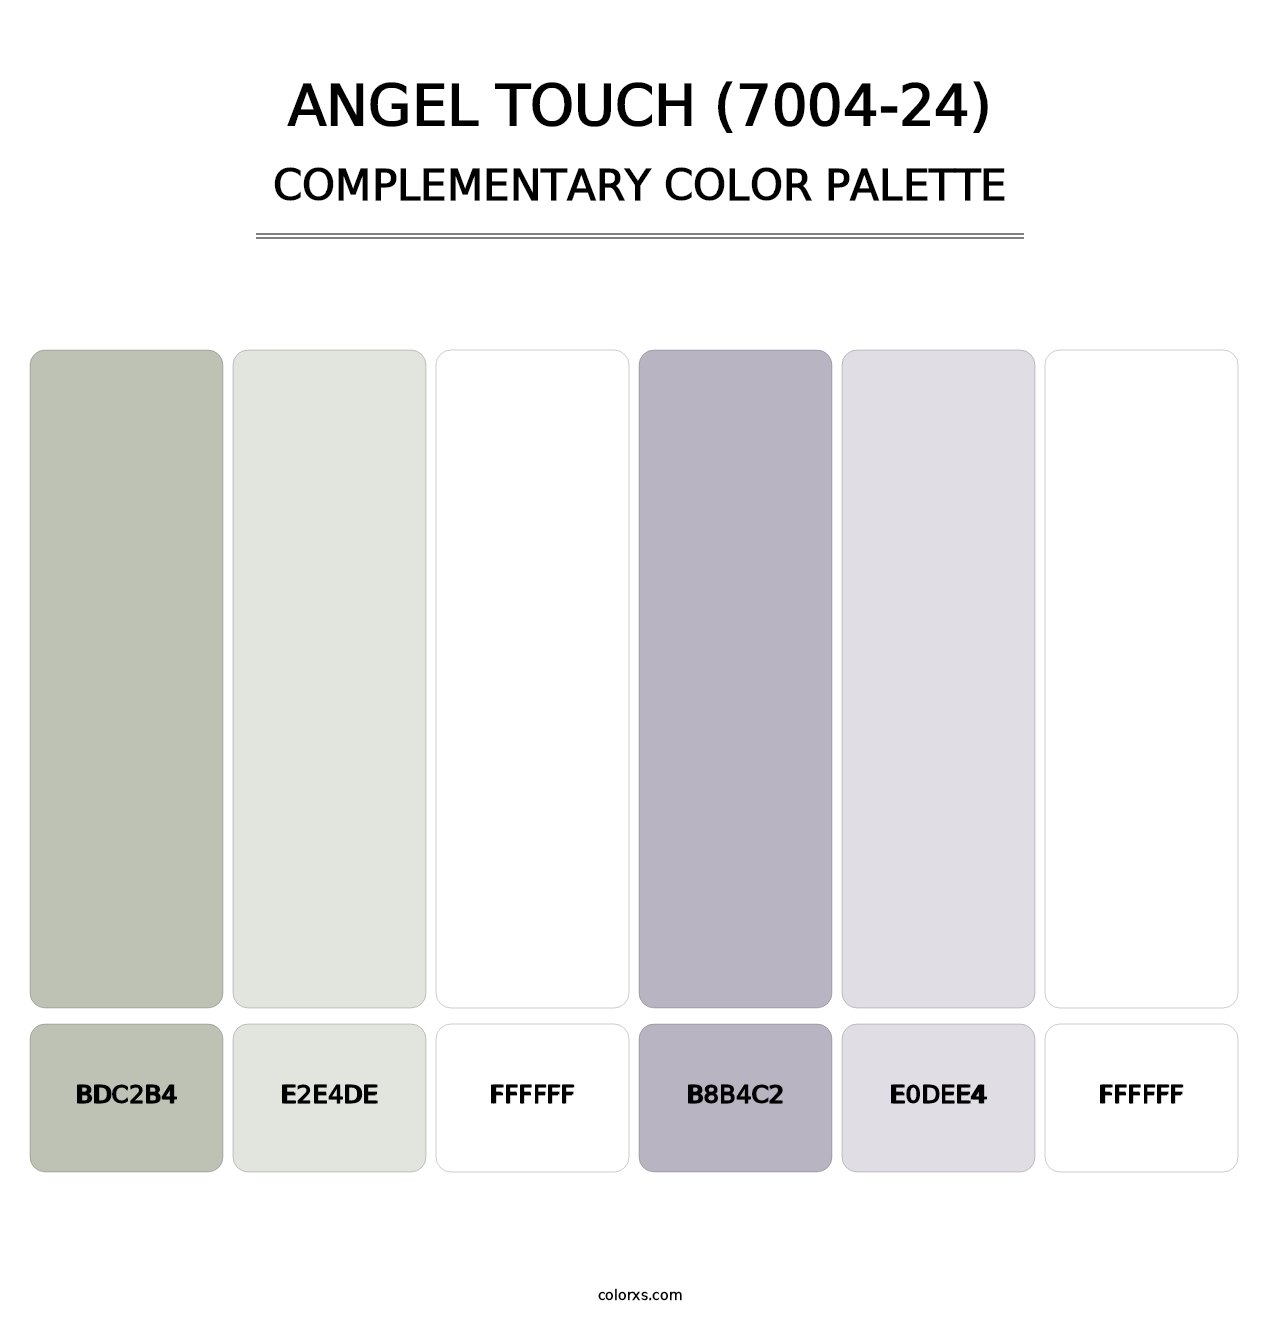 Angel Touch (7004-24) - Complementary Color Palette